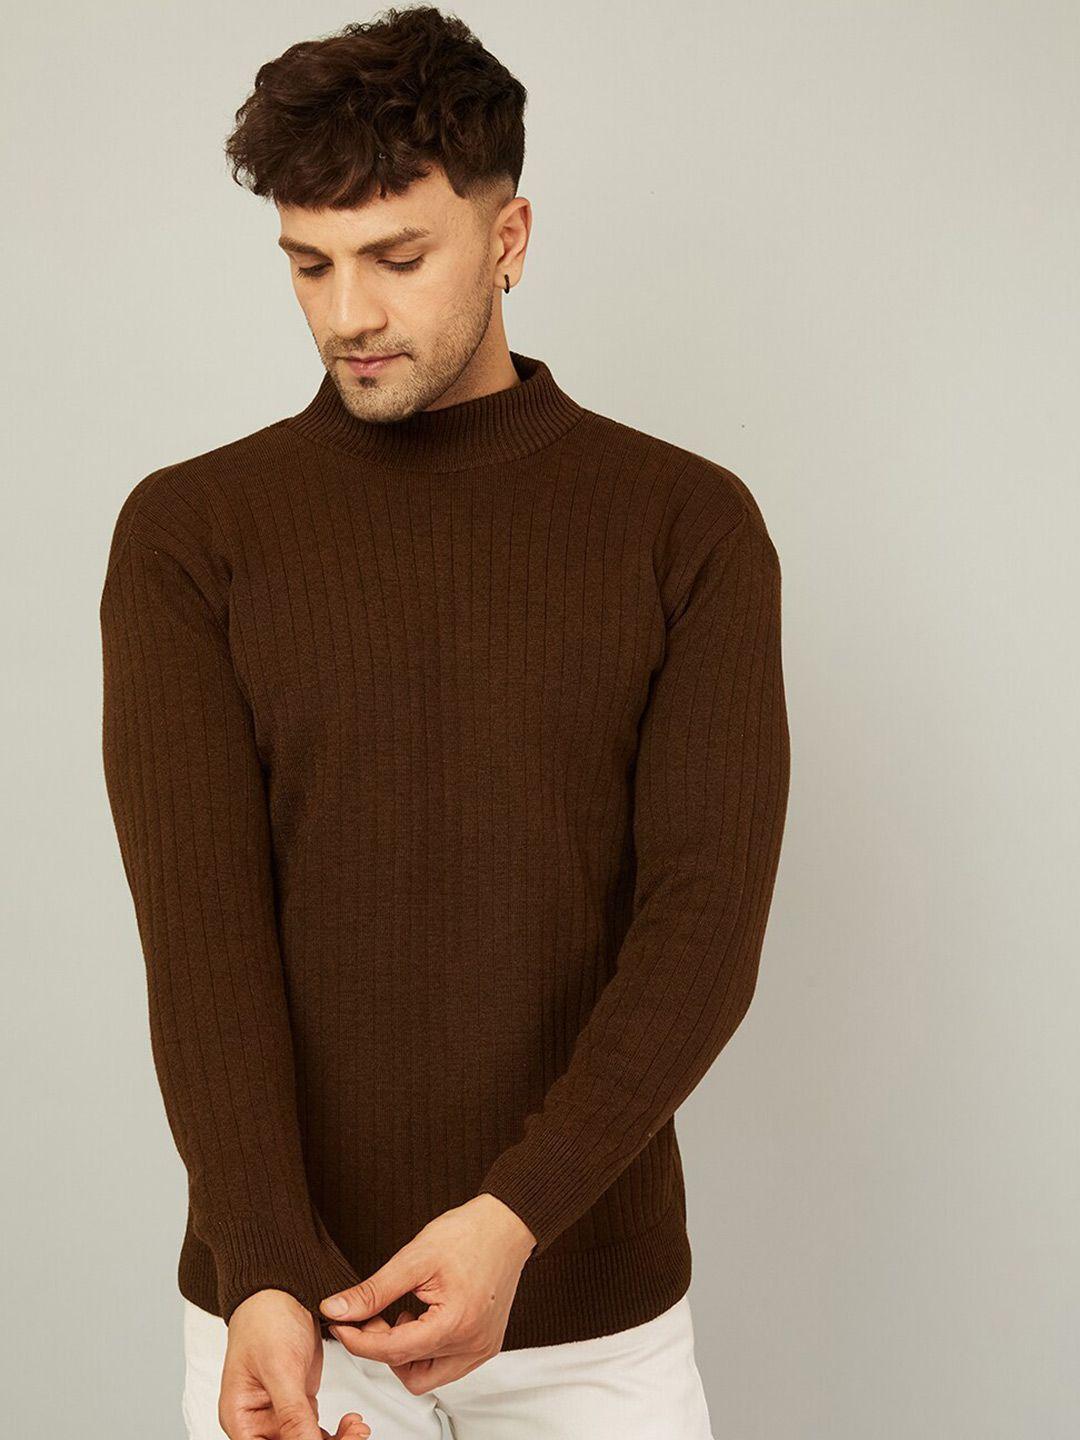 kvetoo high neck striped long sleeves pullover